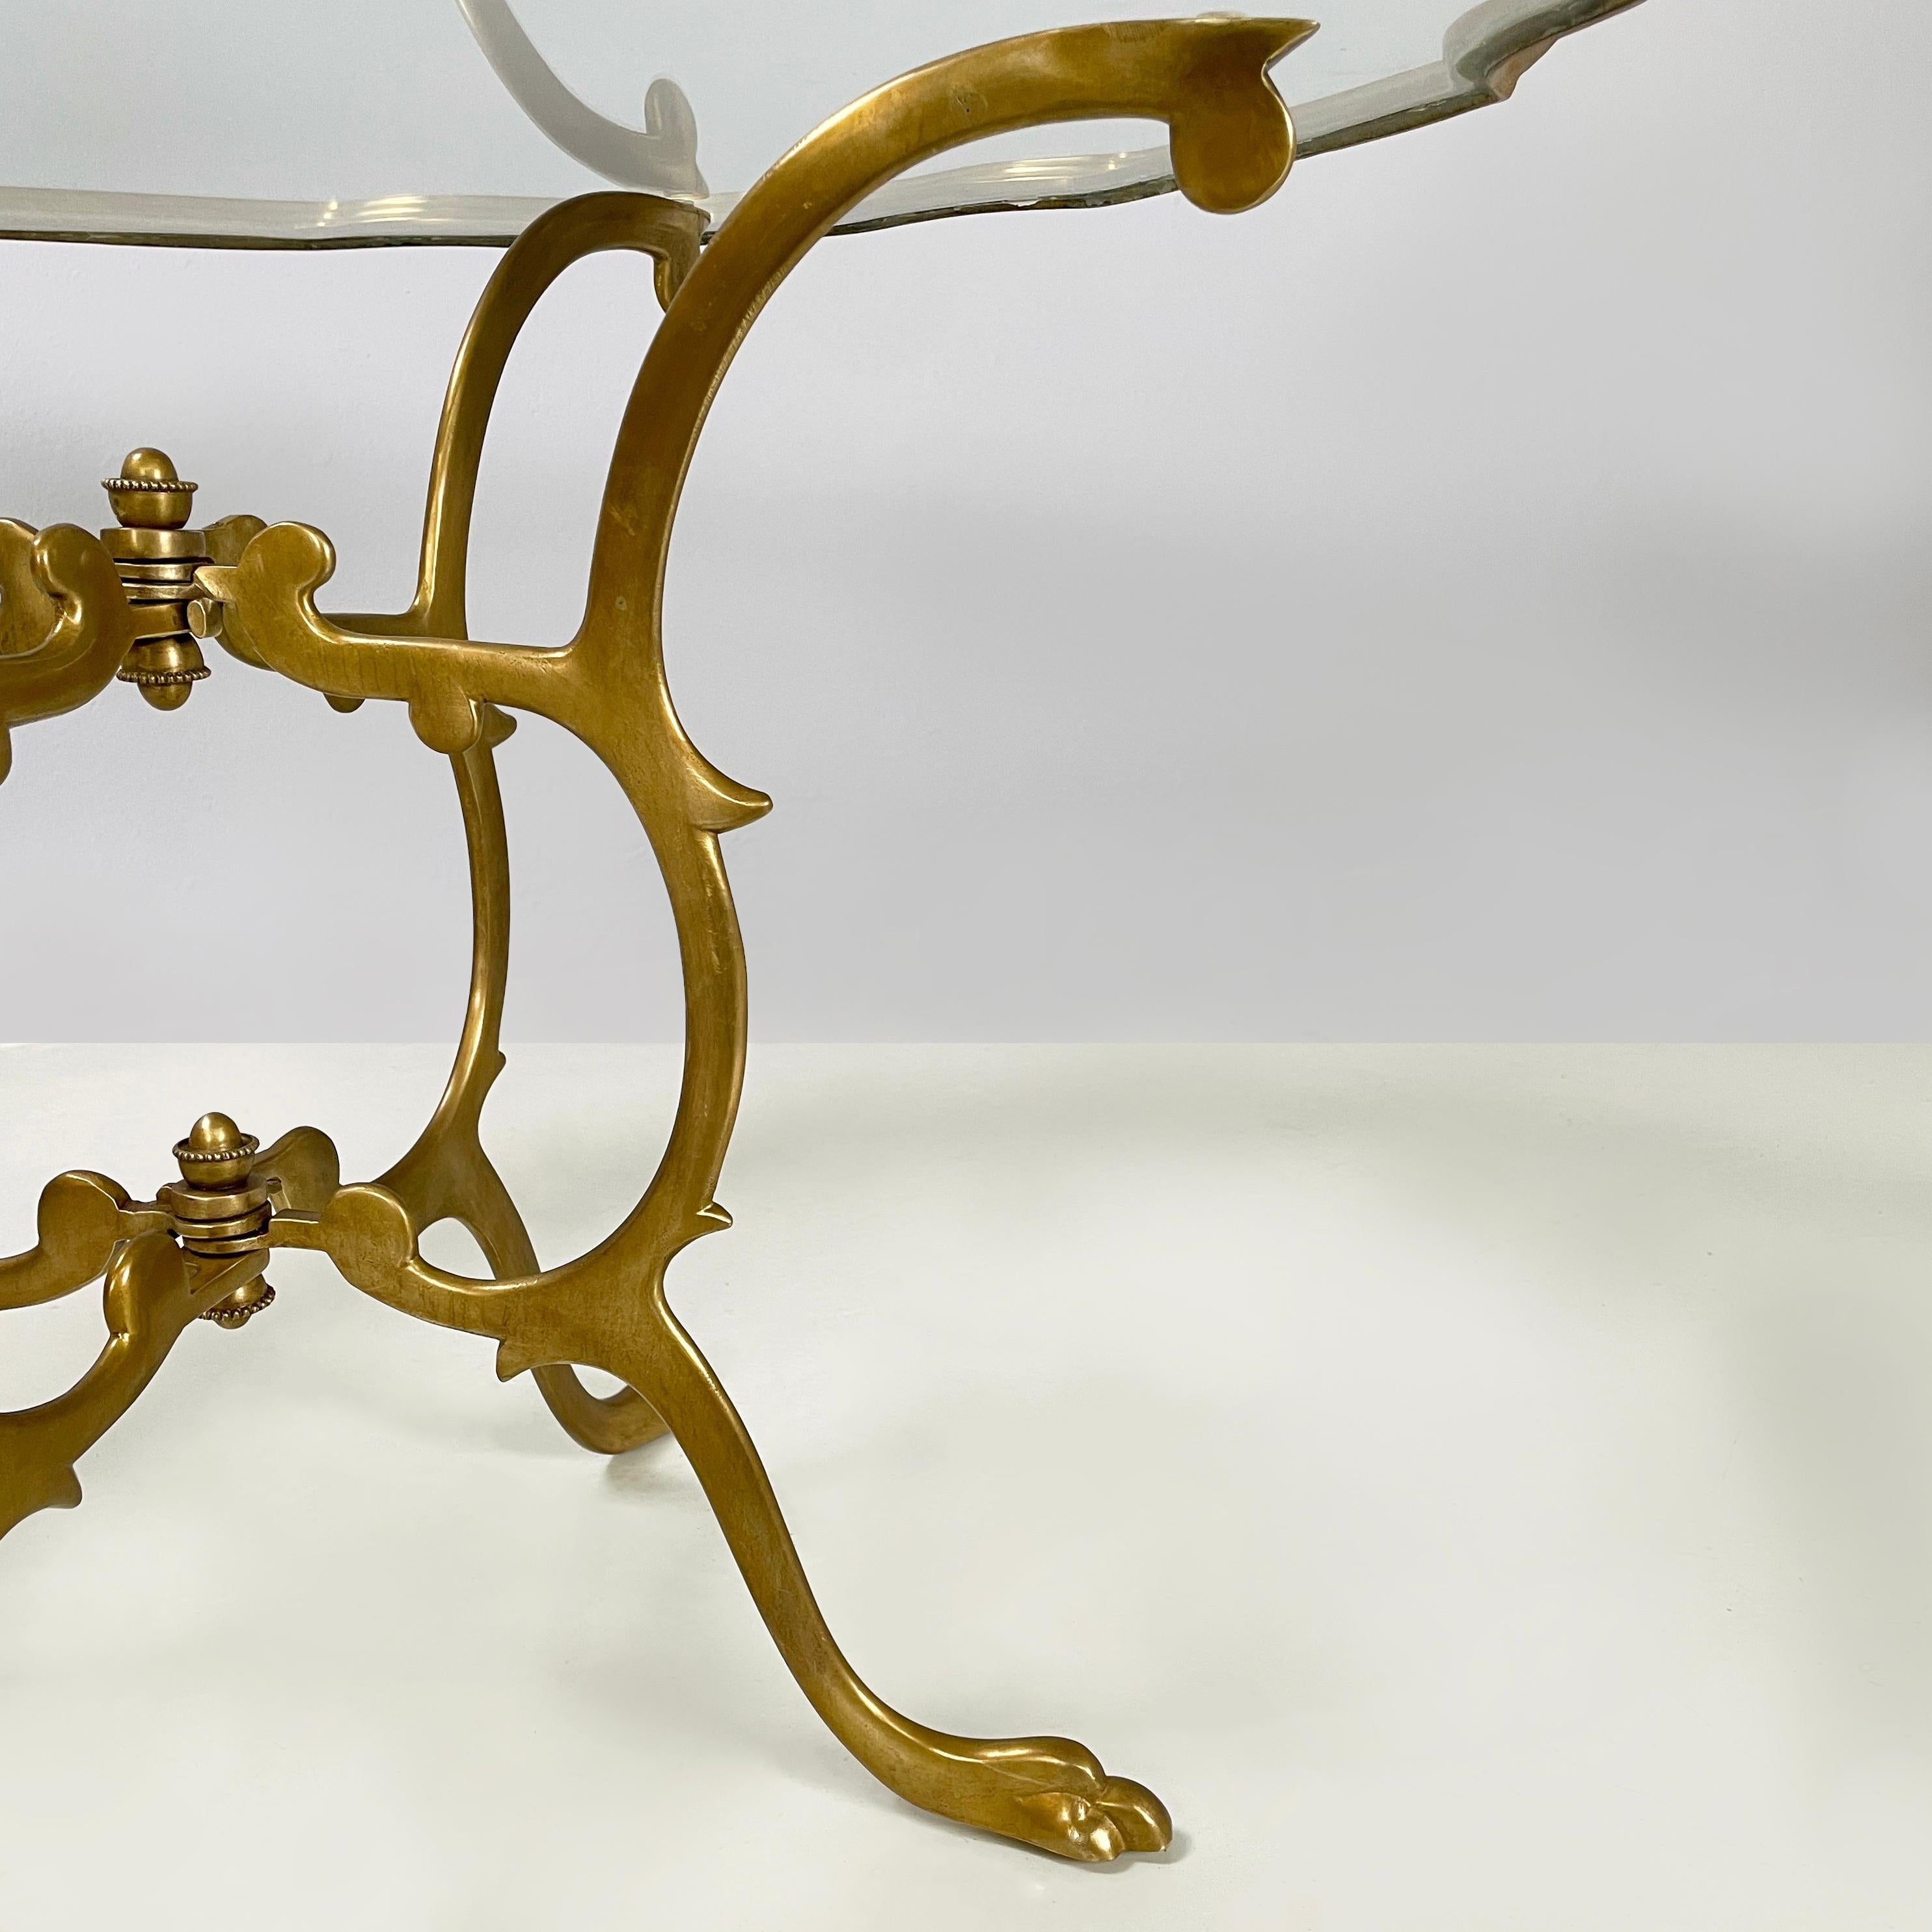 Italian mid-century modern Coffee table in glass and brass, 1960s For Sale 7